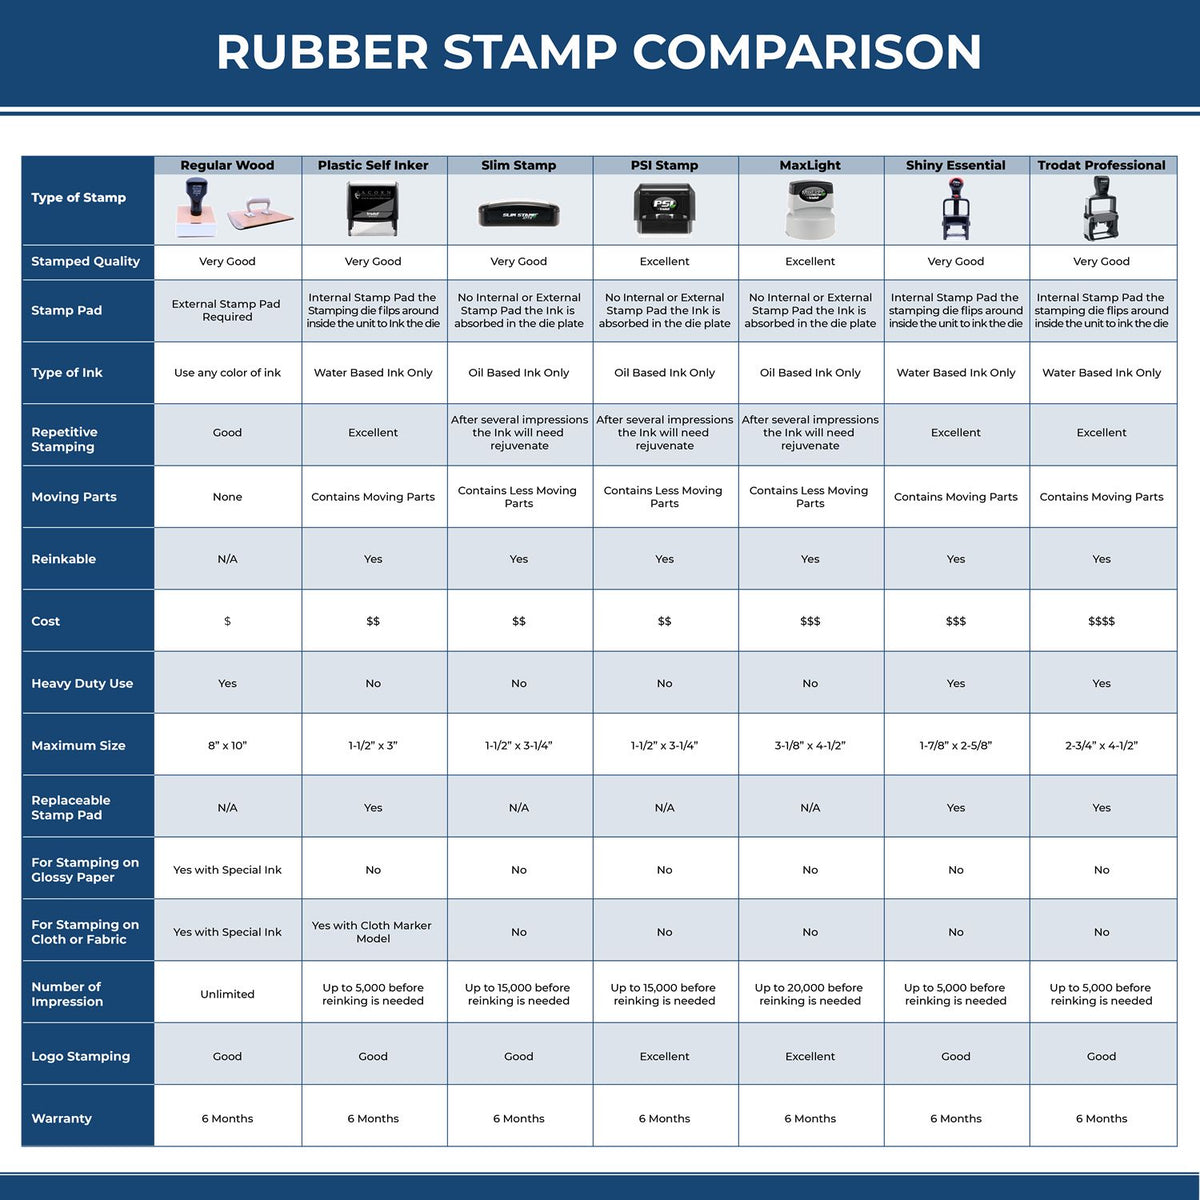 A comparison chart for the different types of mount models available for the PSI Vermont Notary Stamp.